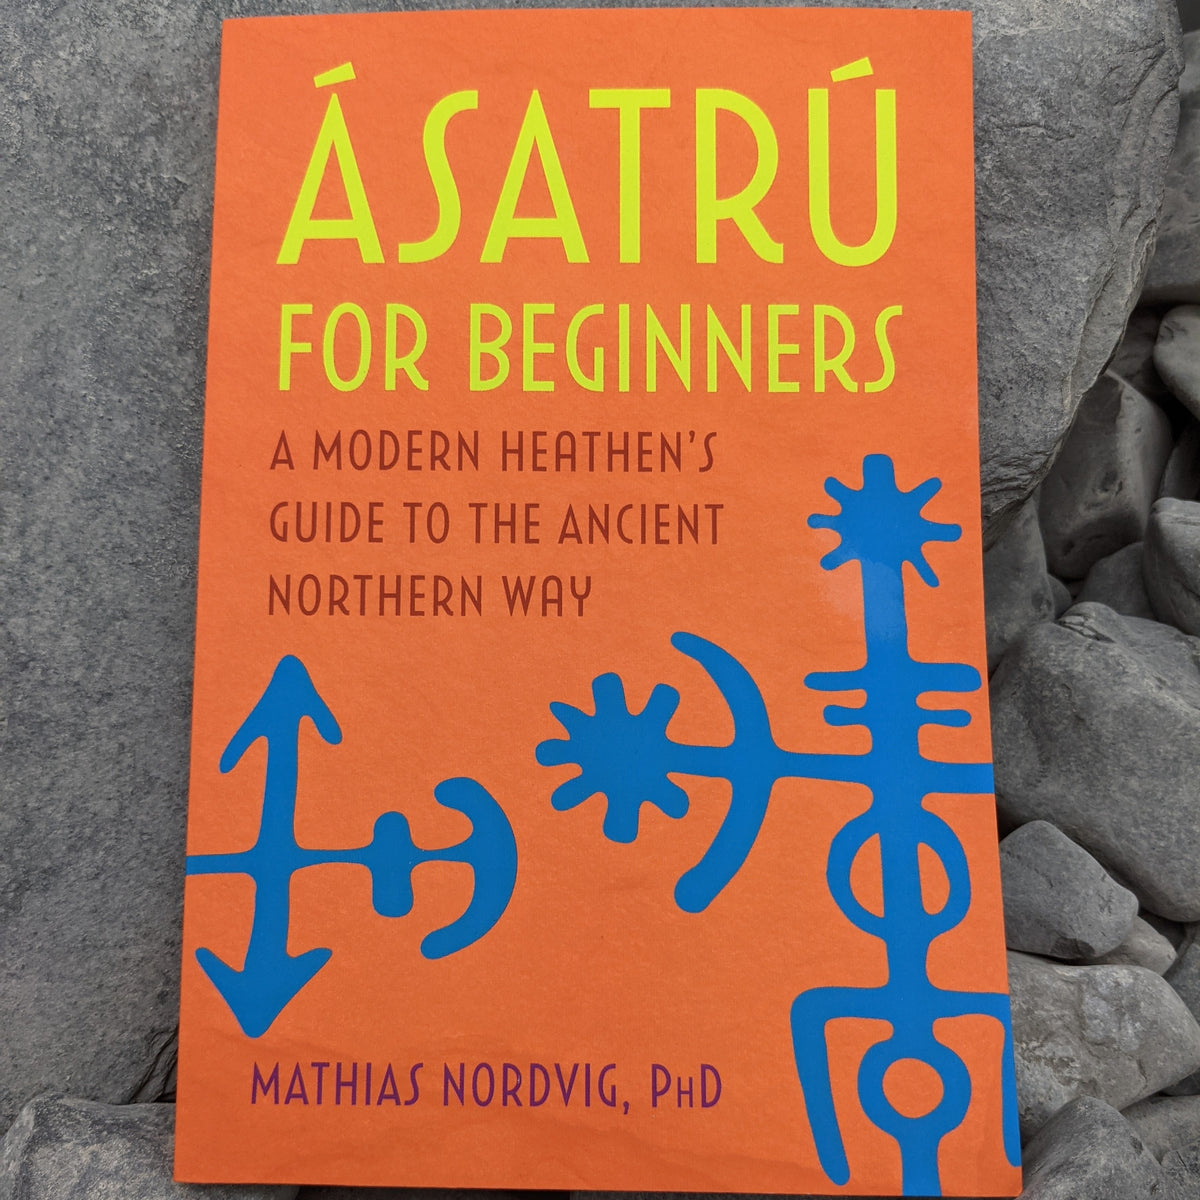 Ásatrú For Beginners, A Modern Heathen's Guide To The Ancient Northern Way By Mathias Nordvig, PHD, Paperback